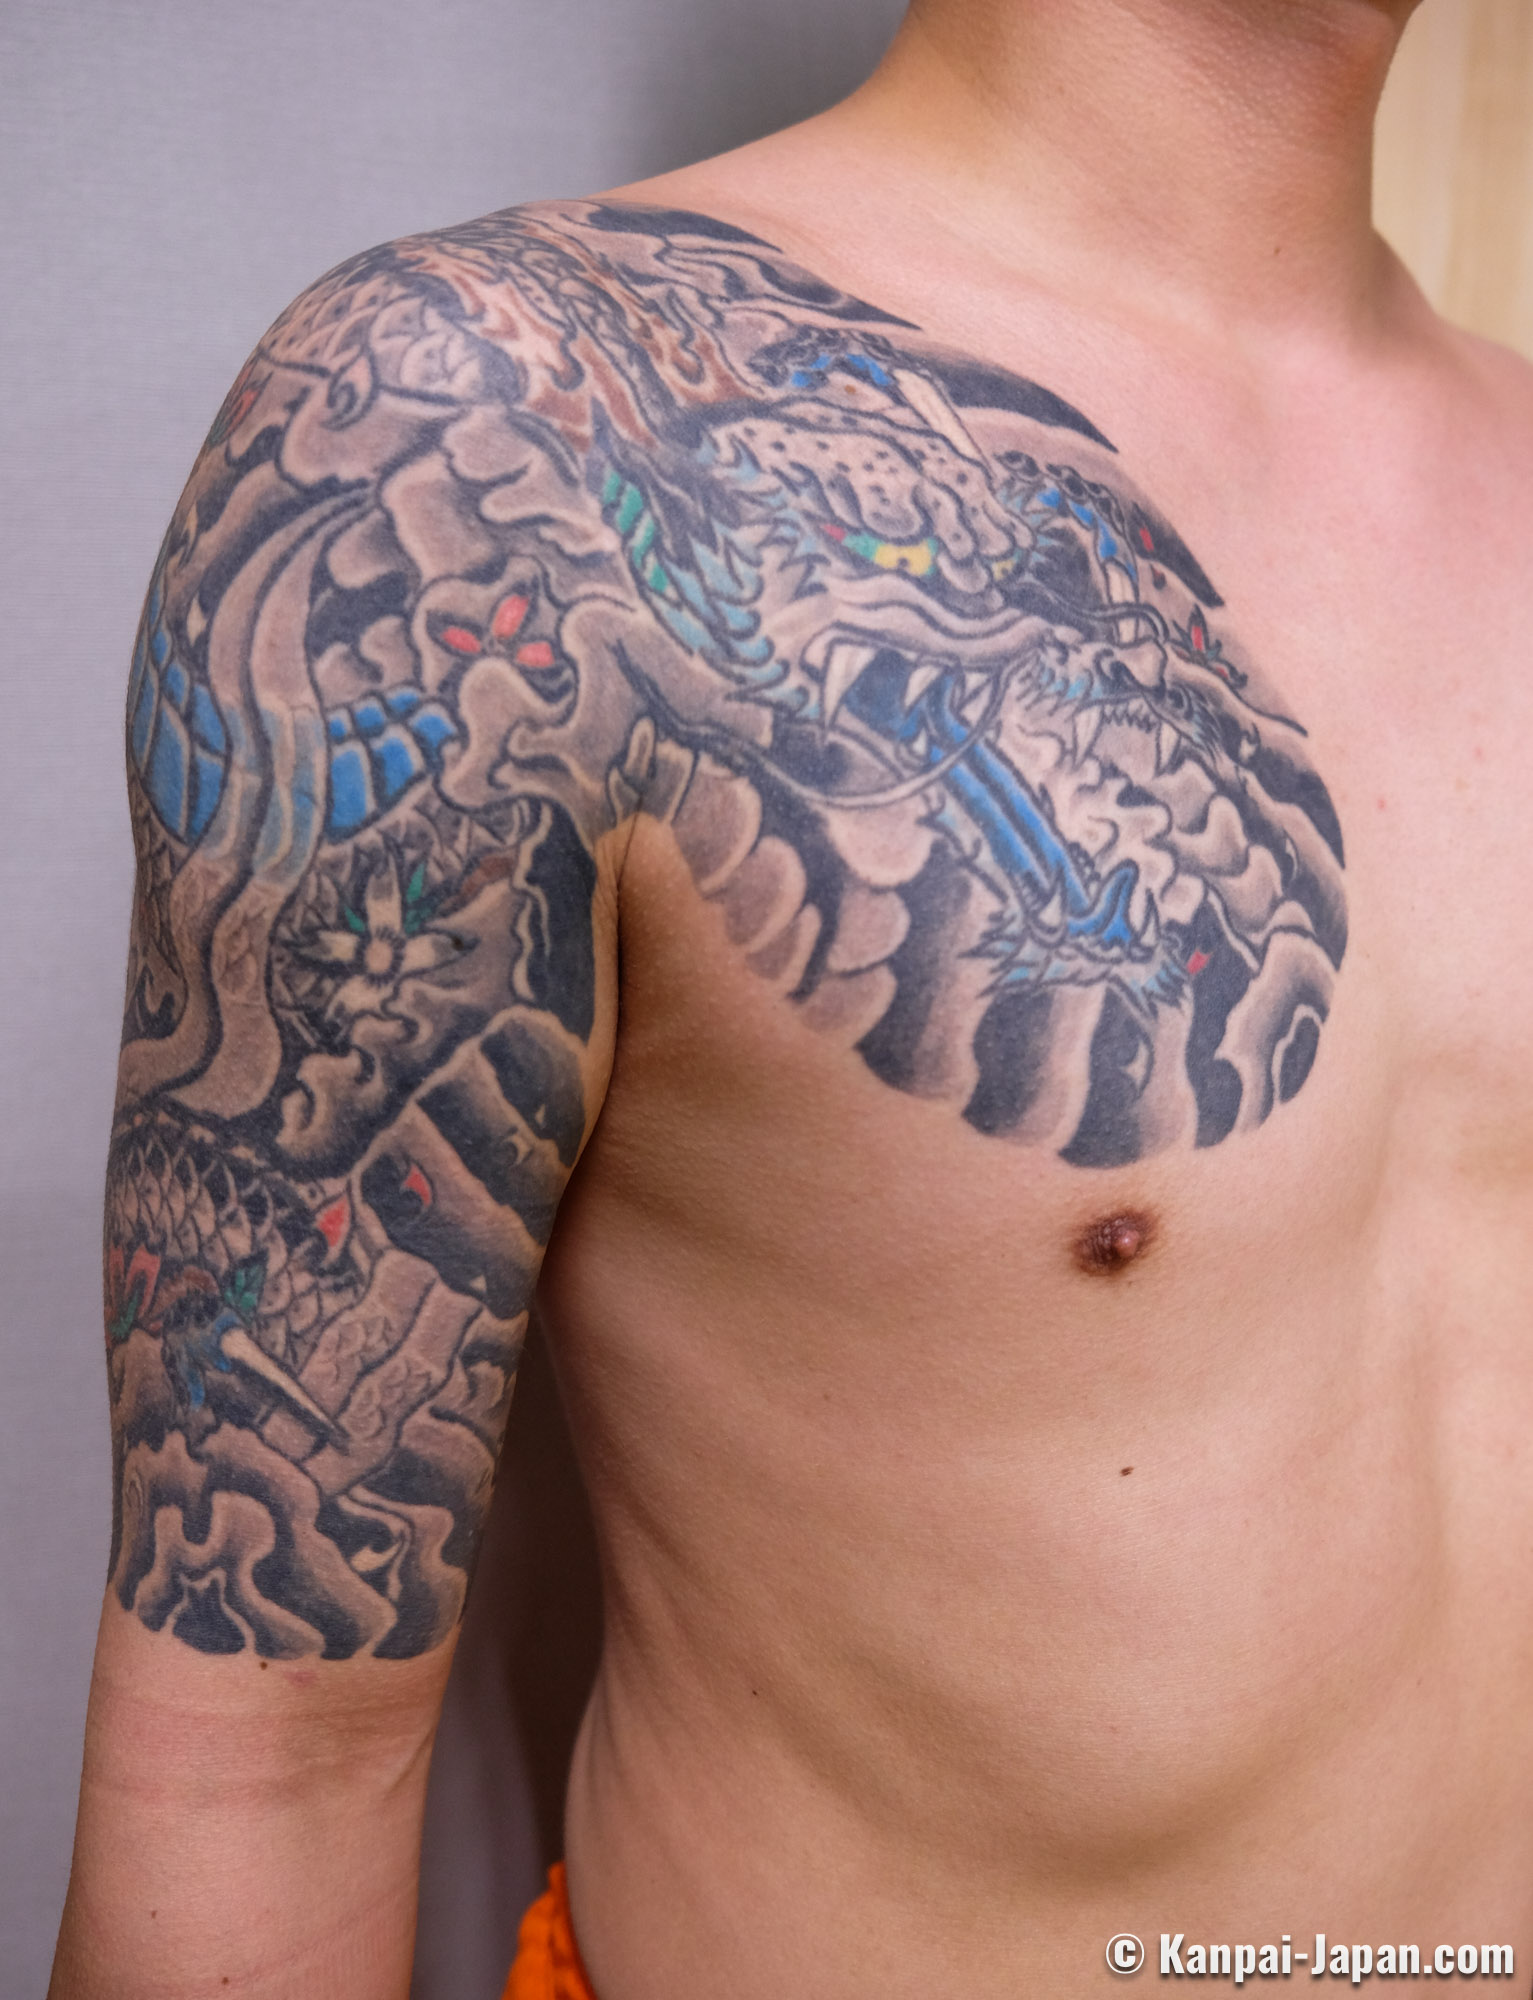 Traveling with Tattoos in Japan - A Challenge to the Japanese Hospitality